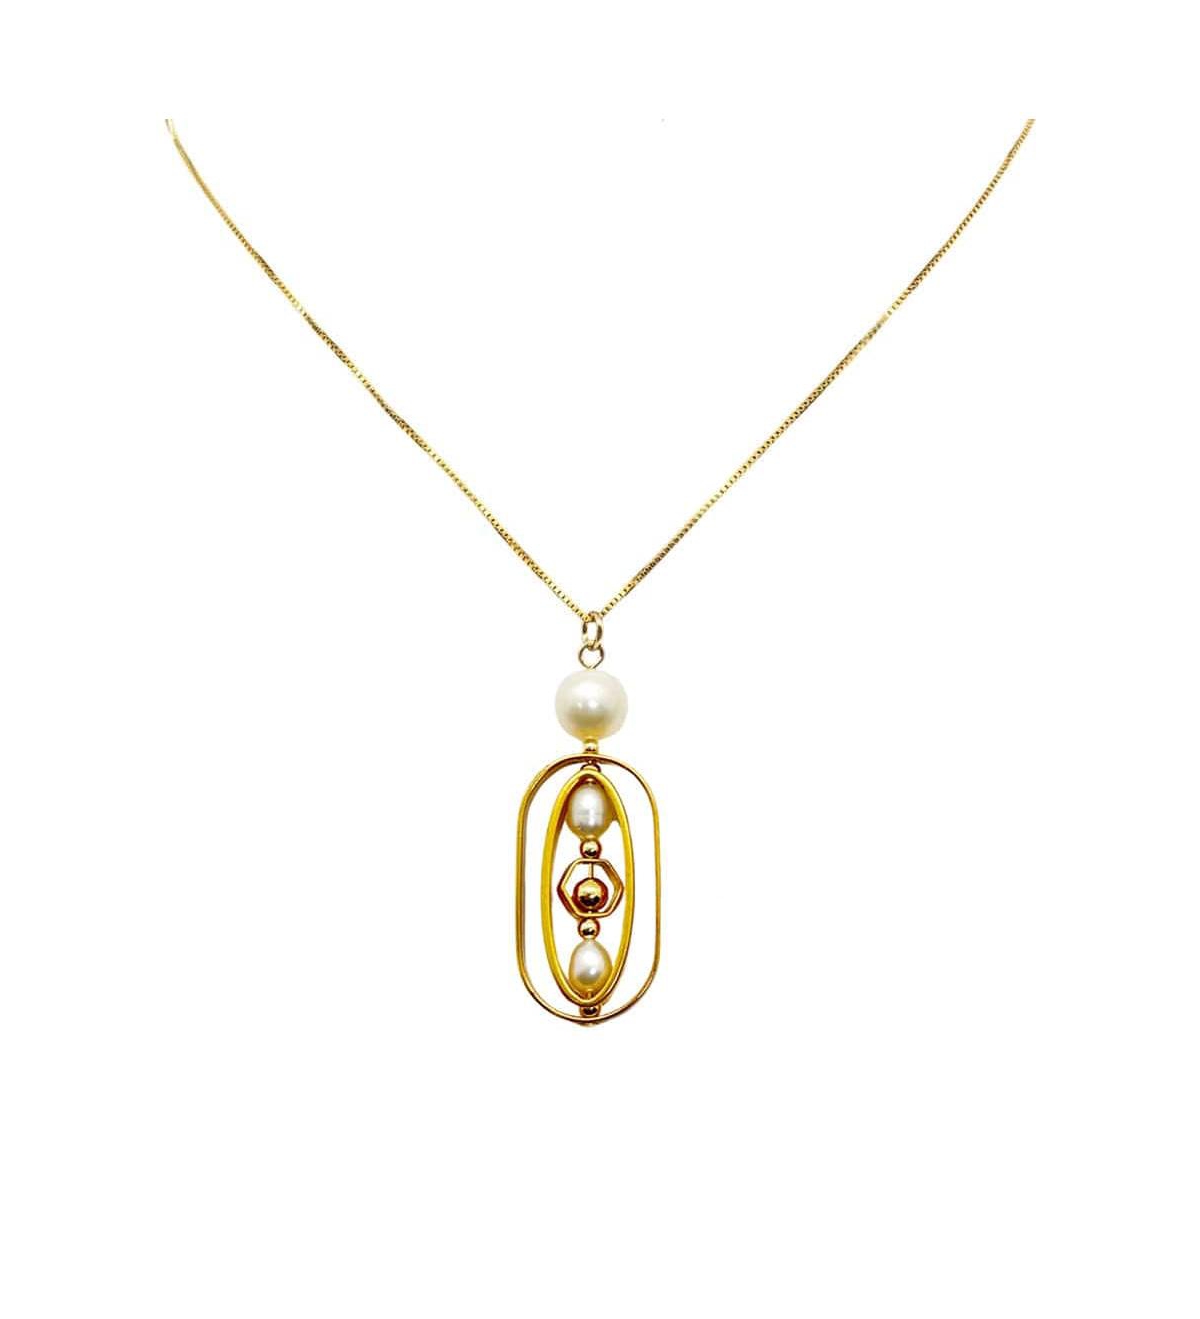 Pearls Geometric Pendant 18in Chain Necklace - White and gold